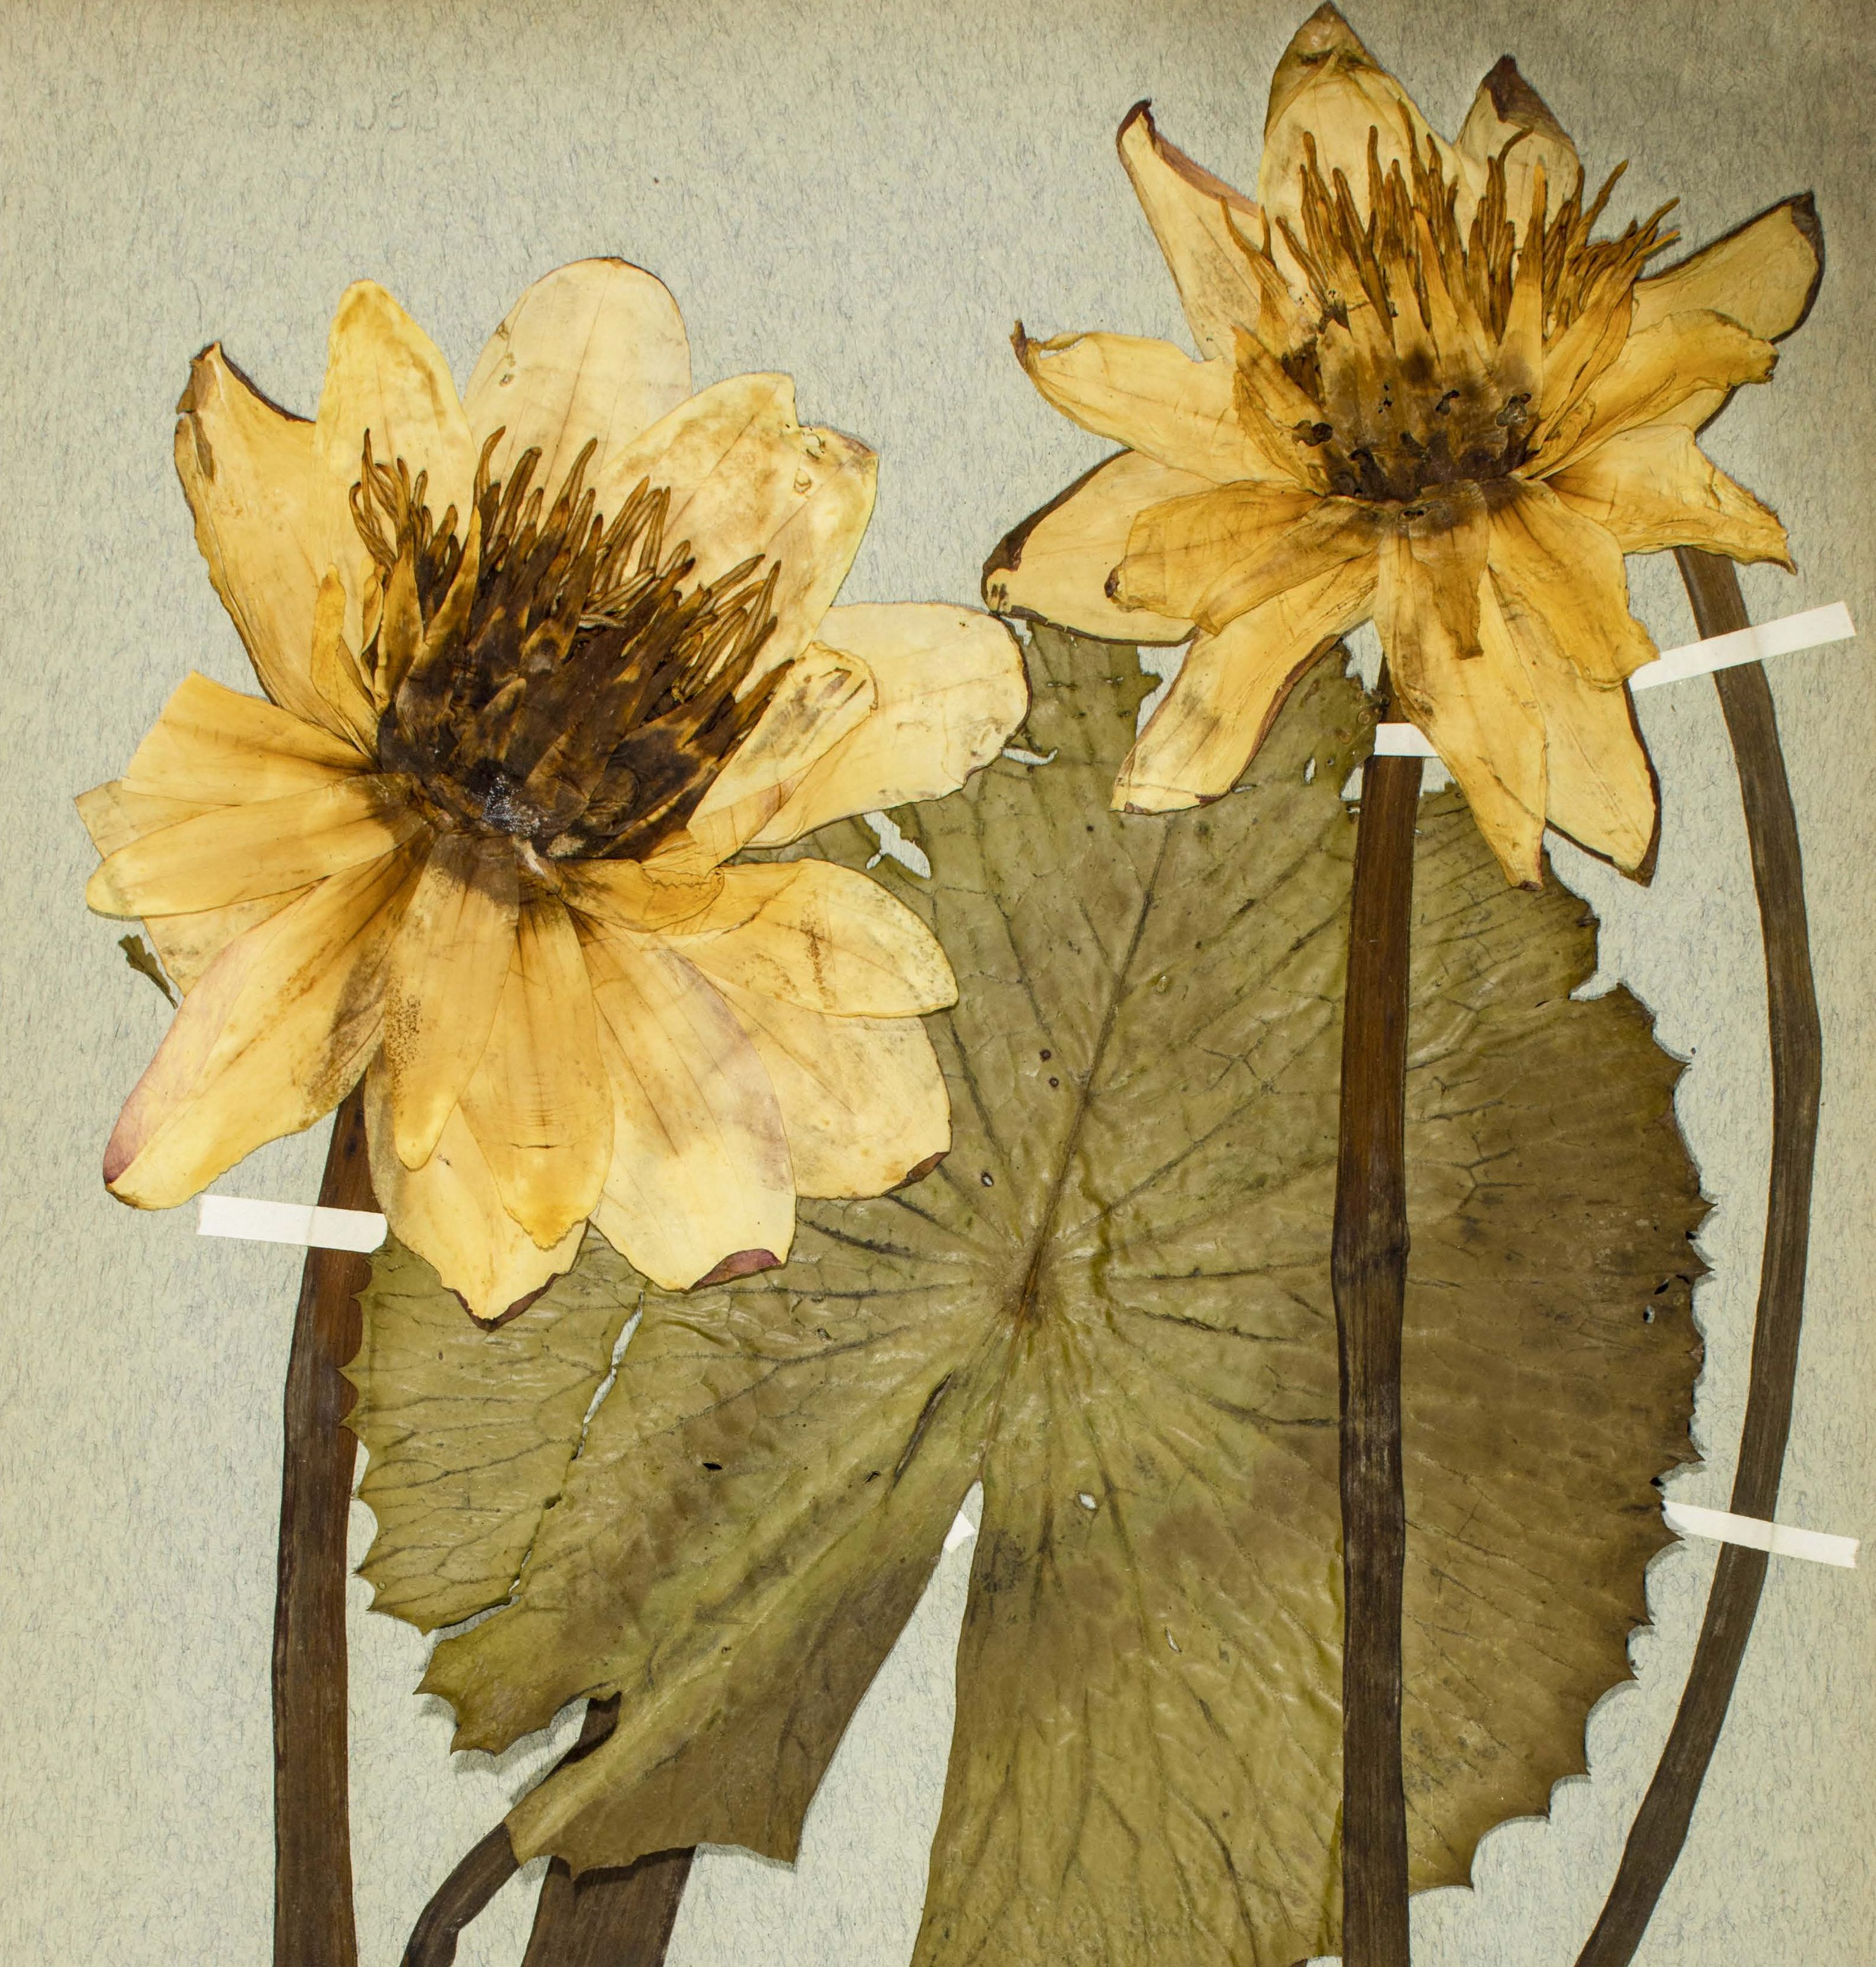 Eighty-year-old herbarium specimen of the White water-lily from the collection of Rezső Soó